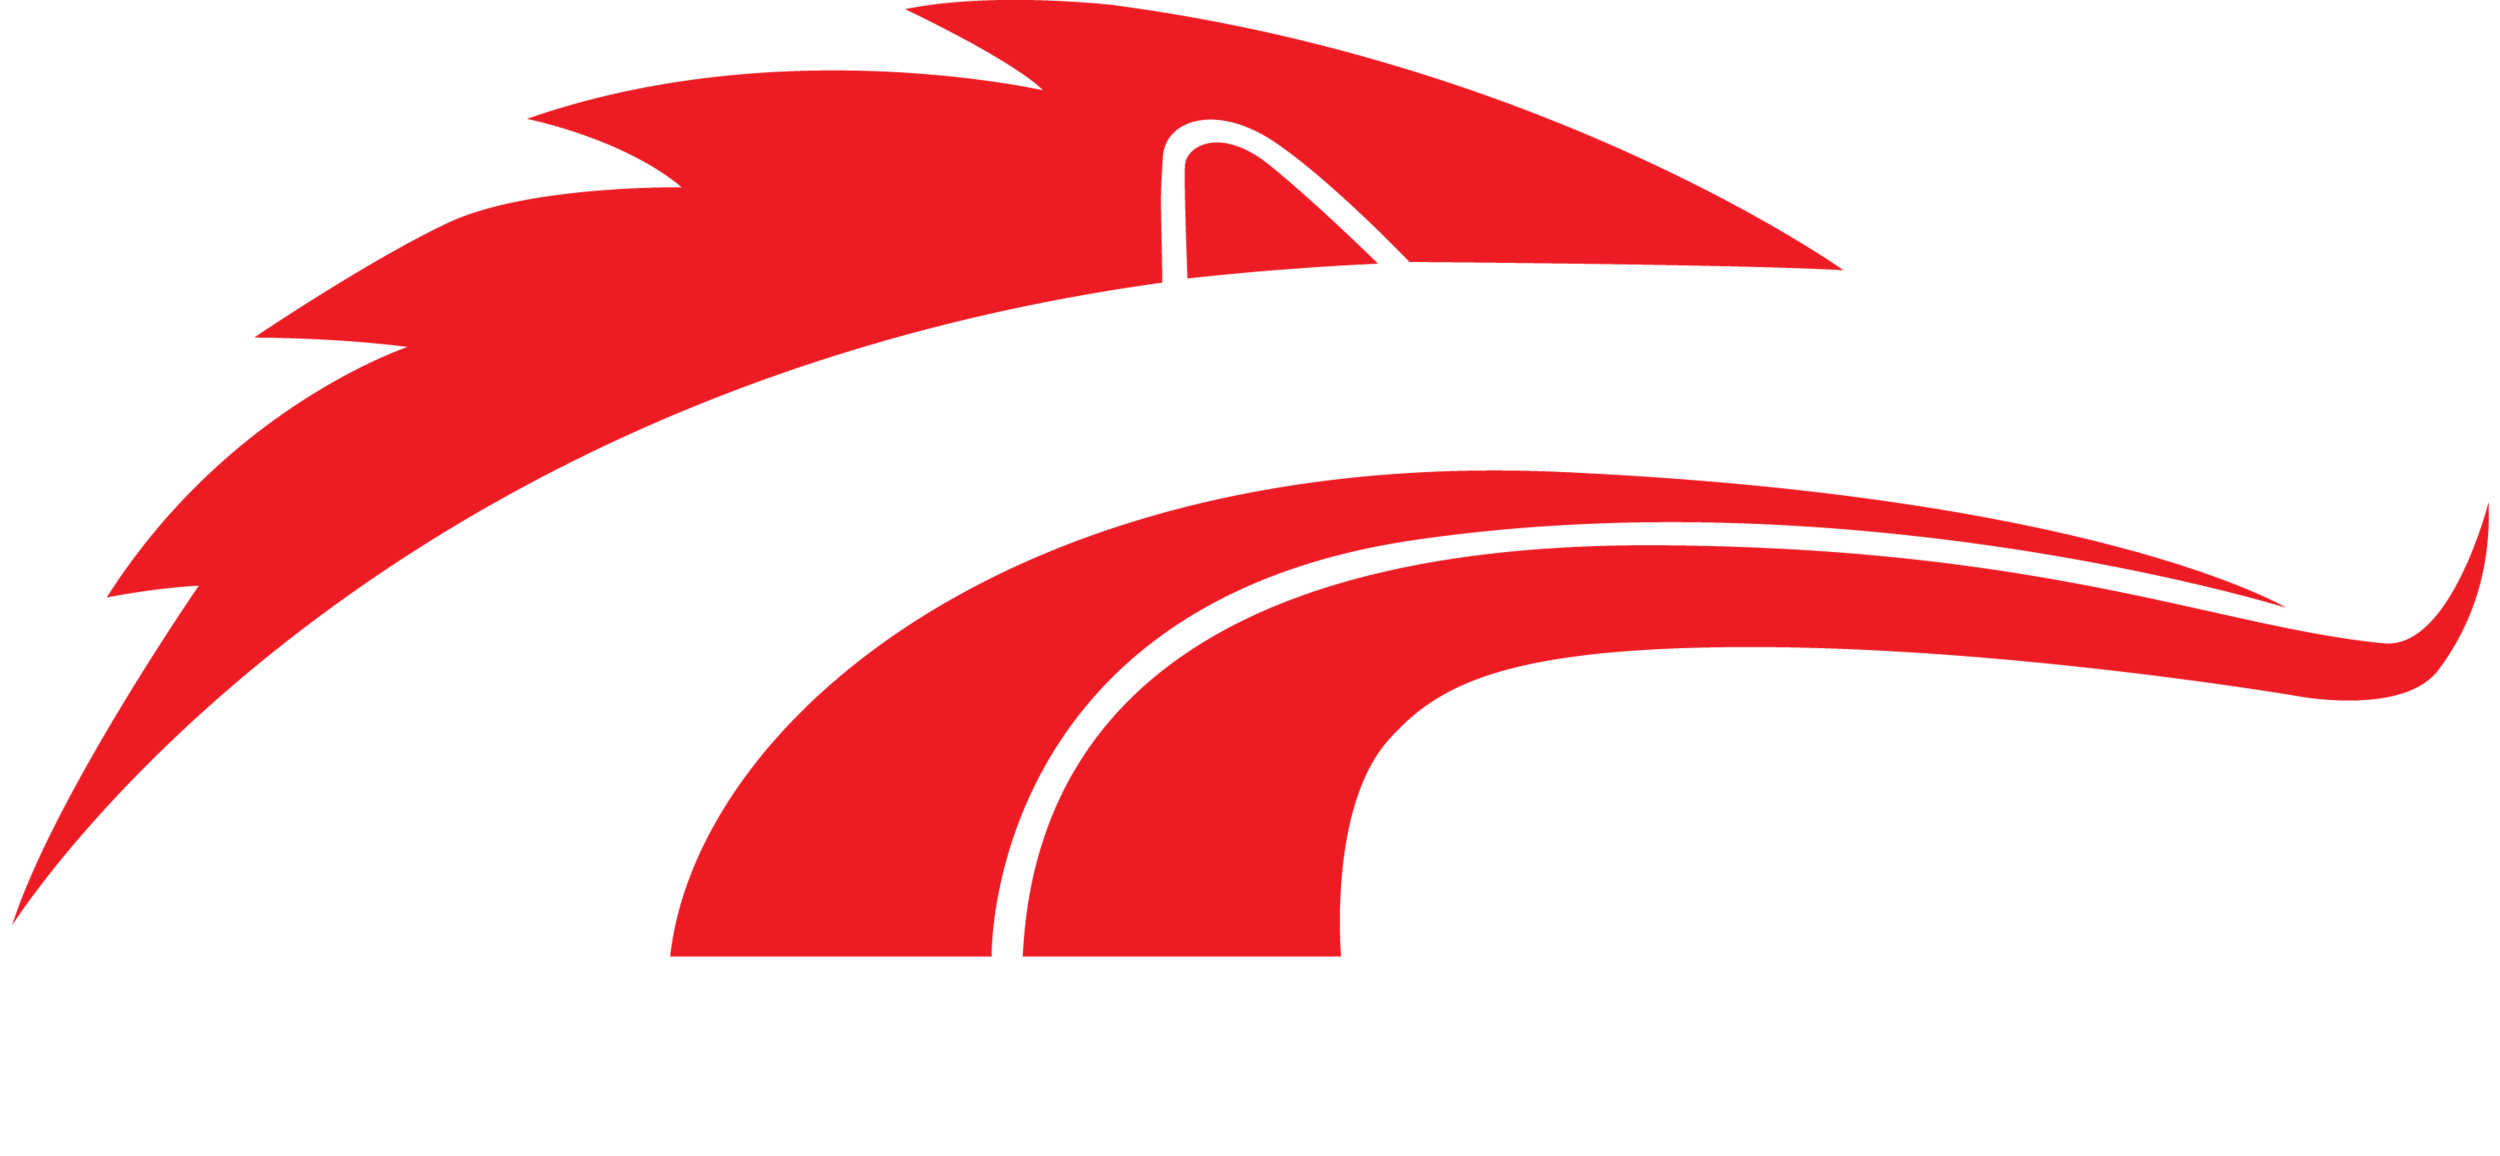 GATEWAY_classic_mustang_no backgroung_white type.png